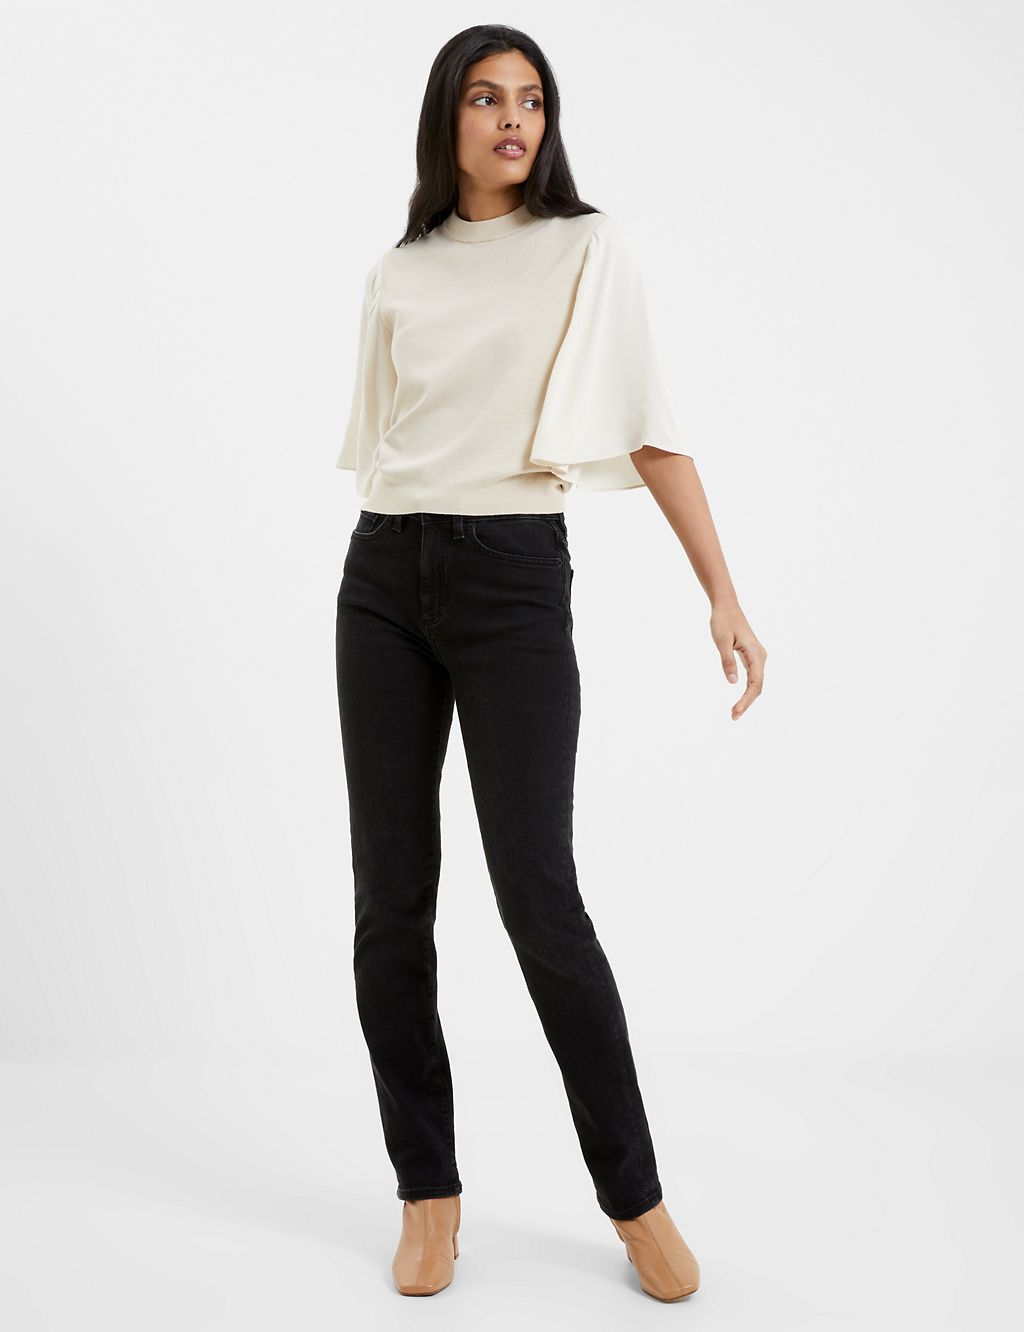 Crew Neck Wide Sleeve Knitted Top | French Connection | M&S